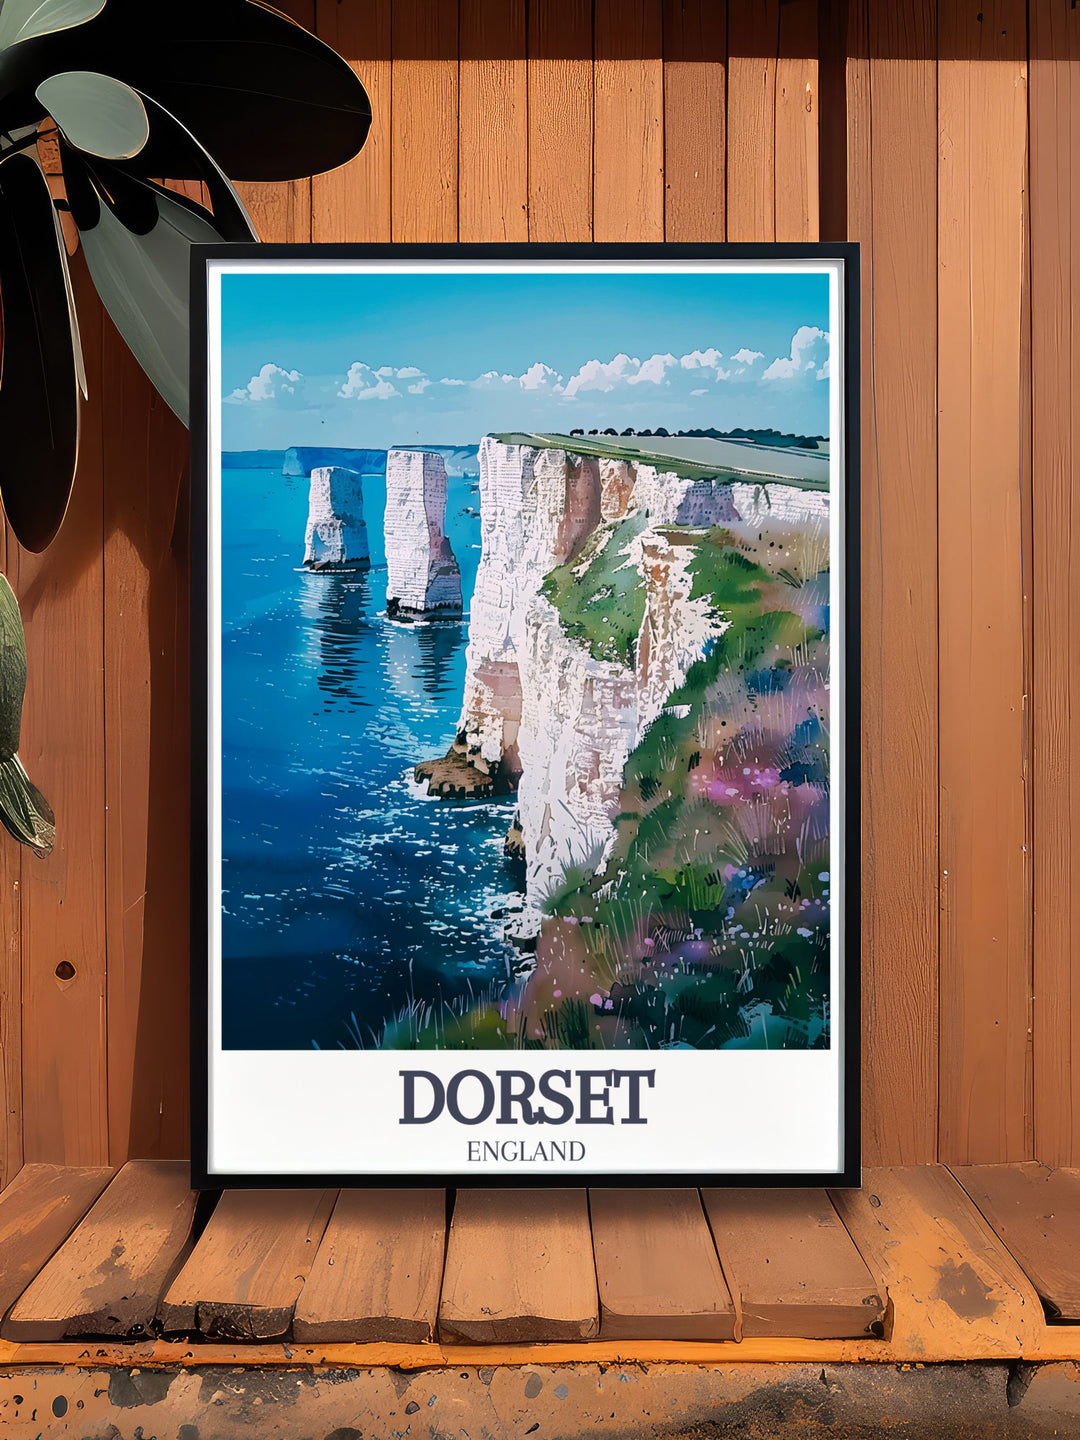 Dorsets rich coastal heritage is celebrated in this poster, featuring the iconic formations of Old Harry Rocks and the picturesque views of the Jurassic Coast.